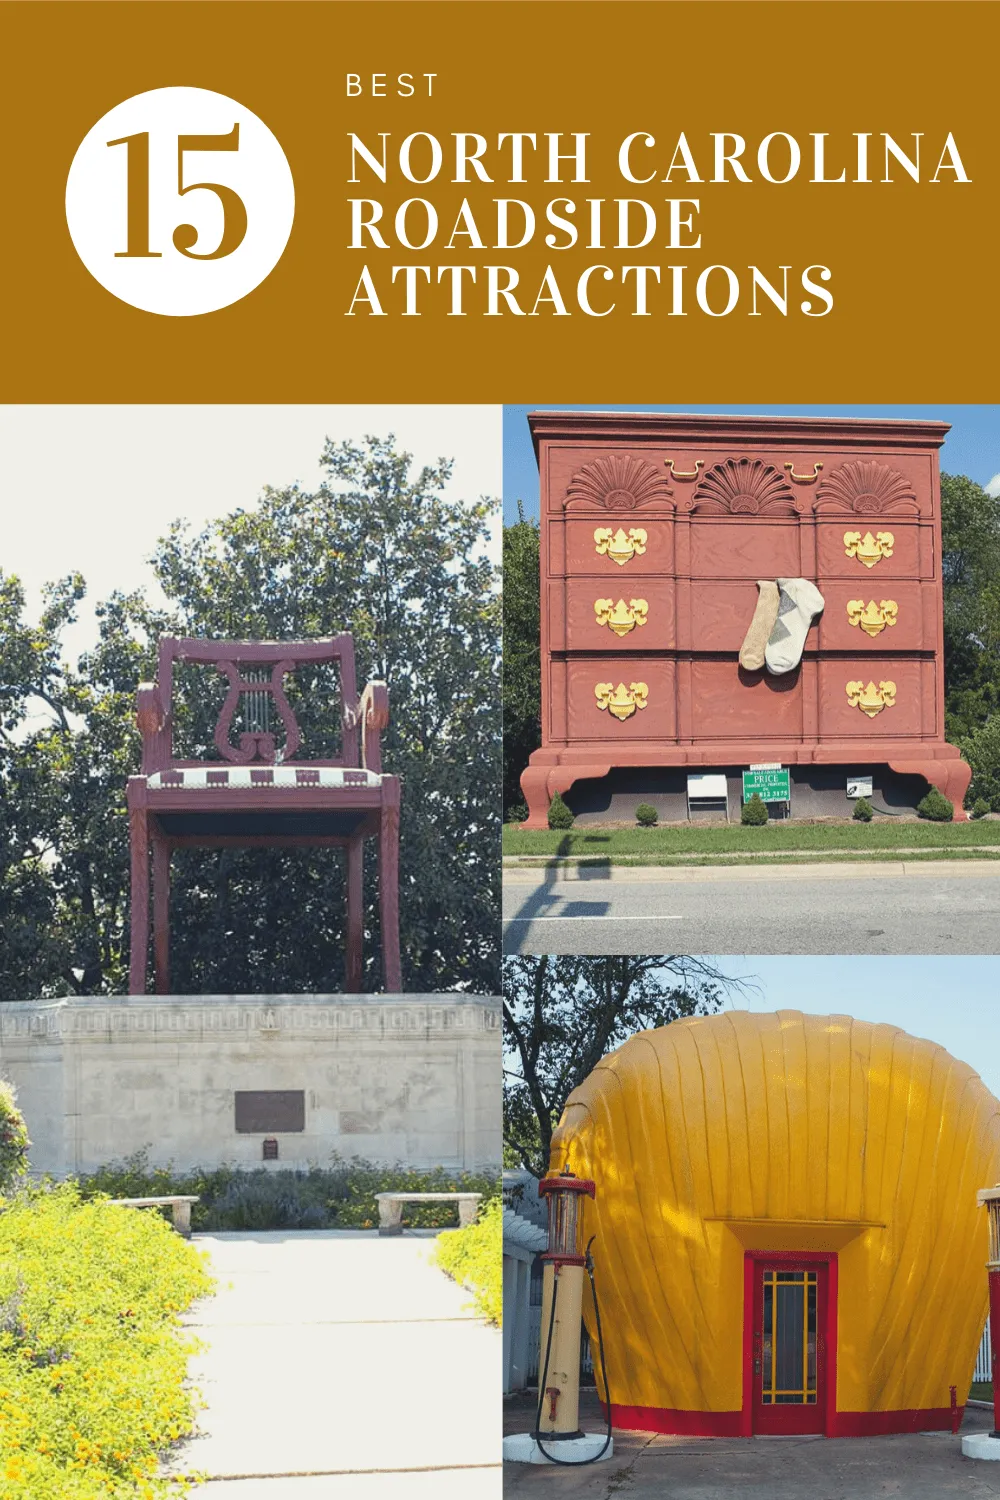 The best North Carolina roadside attractions to visit on a North Carolina road trip. Add these roadside oddities to your travel bucket list, itinerary, or route map! Perfect road trip stops for kids or adults! #NorthCarolinaRoadsideAttractions #NorthCarolinaRoadsideAttraction #RoadsideAttractions #RoadsideAttraction #RoadTrip #NorthCarolinaRoadTrip #NorthCarolinaRoadTripBucketLists #NorthCarolinaBucketList #NorthCarolinaRoadTripWIthKids #NorthCarolinaRoadTripTravelGuide